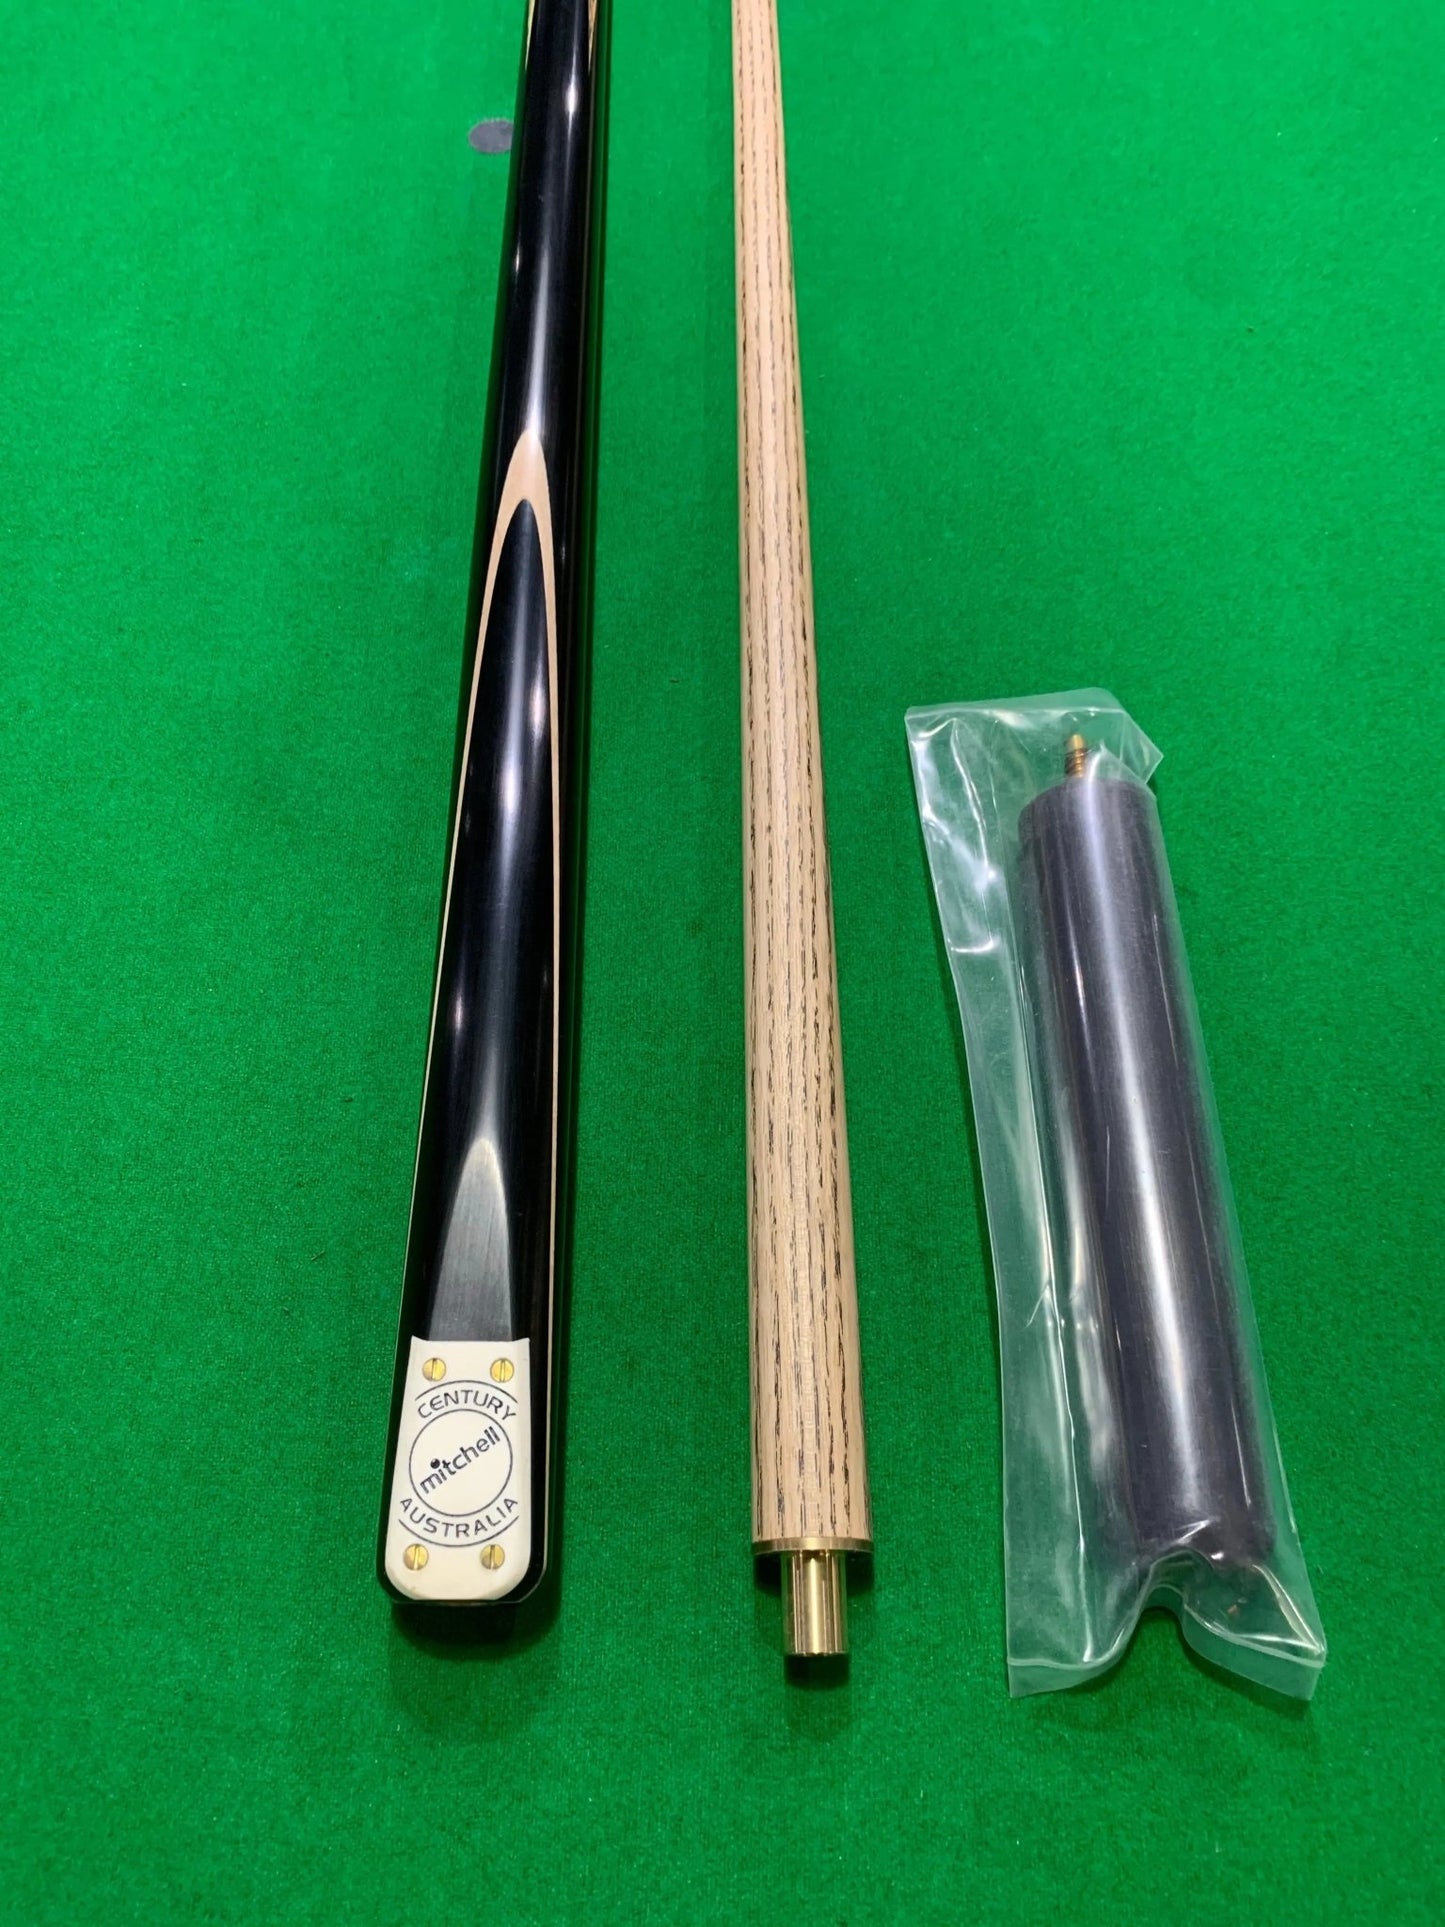 MITCHELL CENTURY 1/2 Piece Pool Snooker Billiard Ash Cue With Extension - Q-Masters